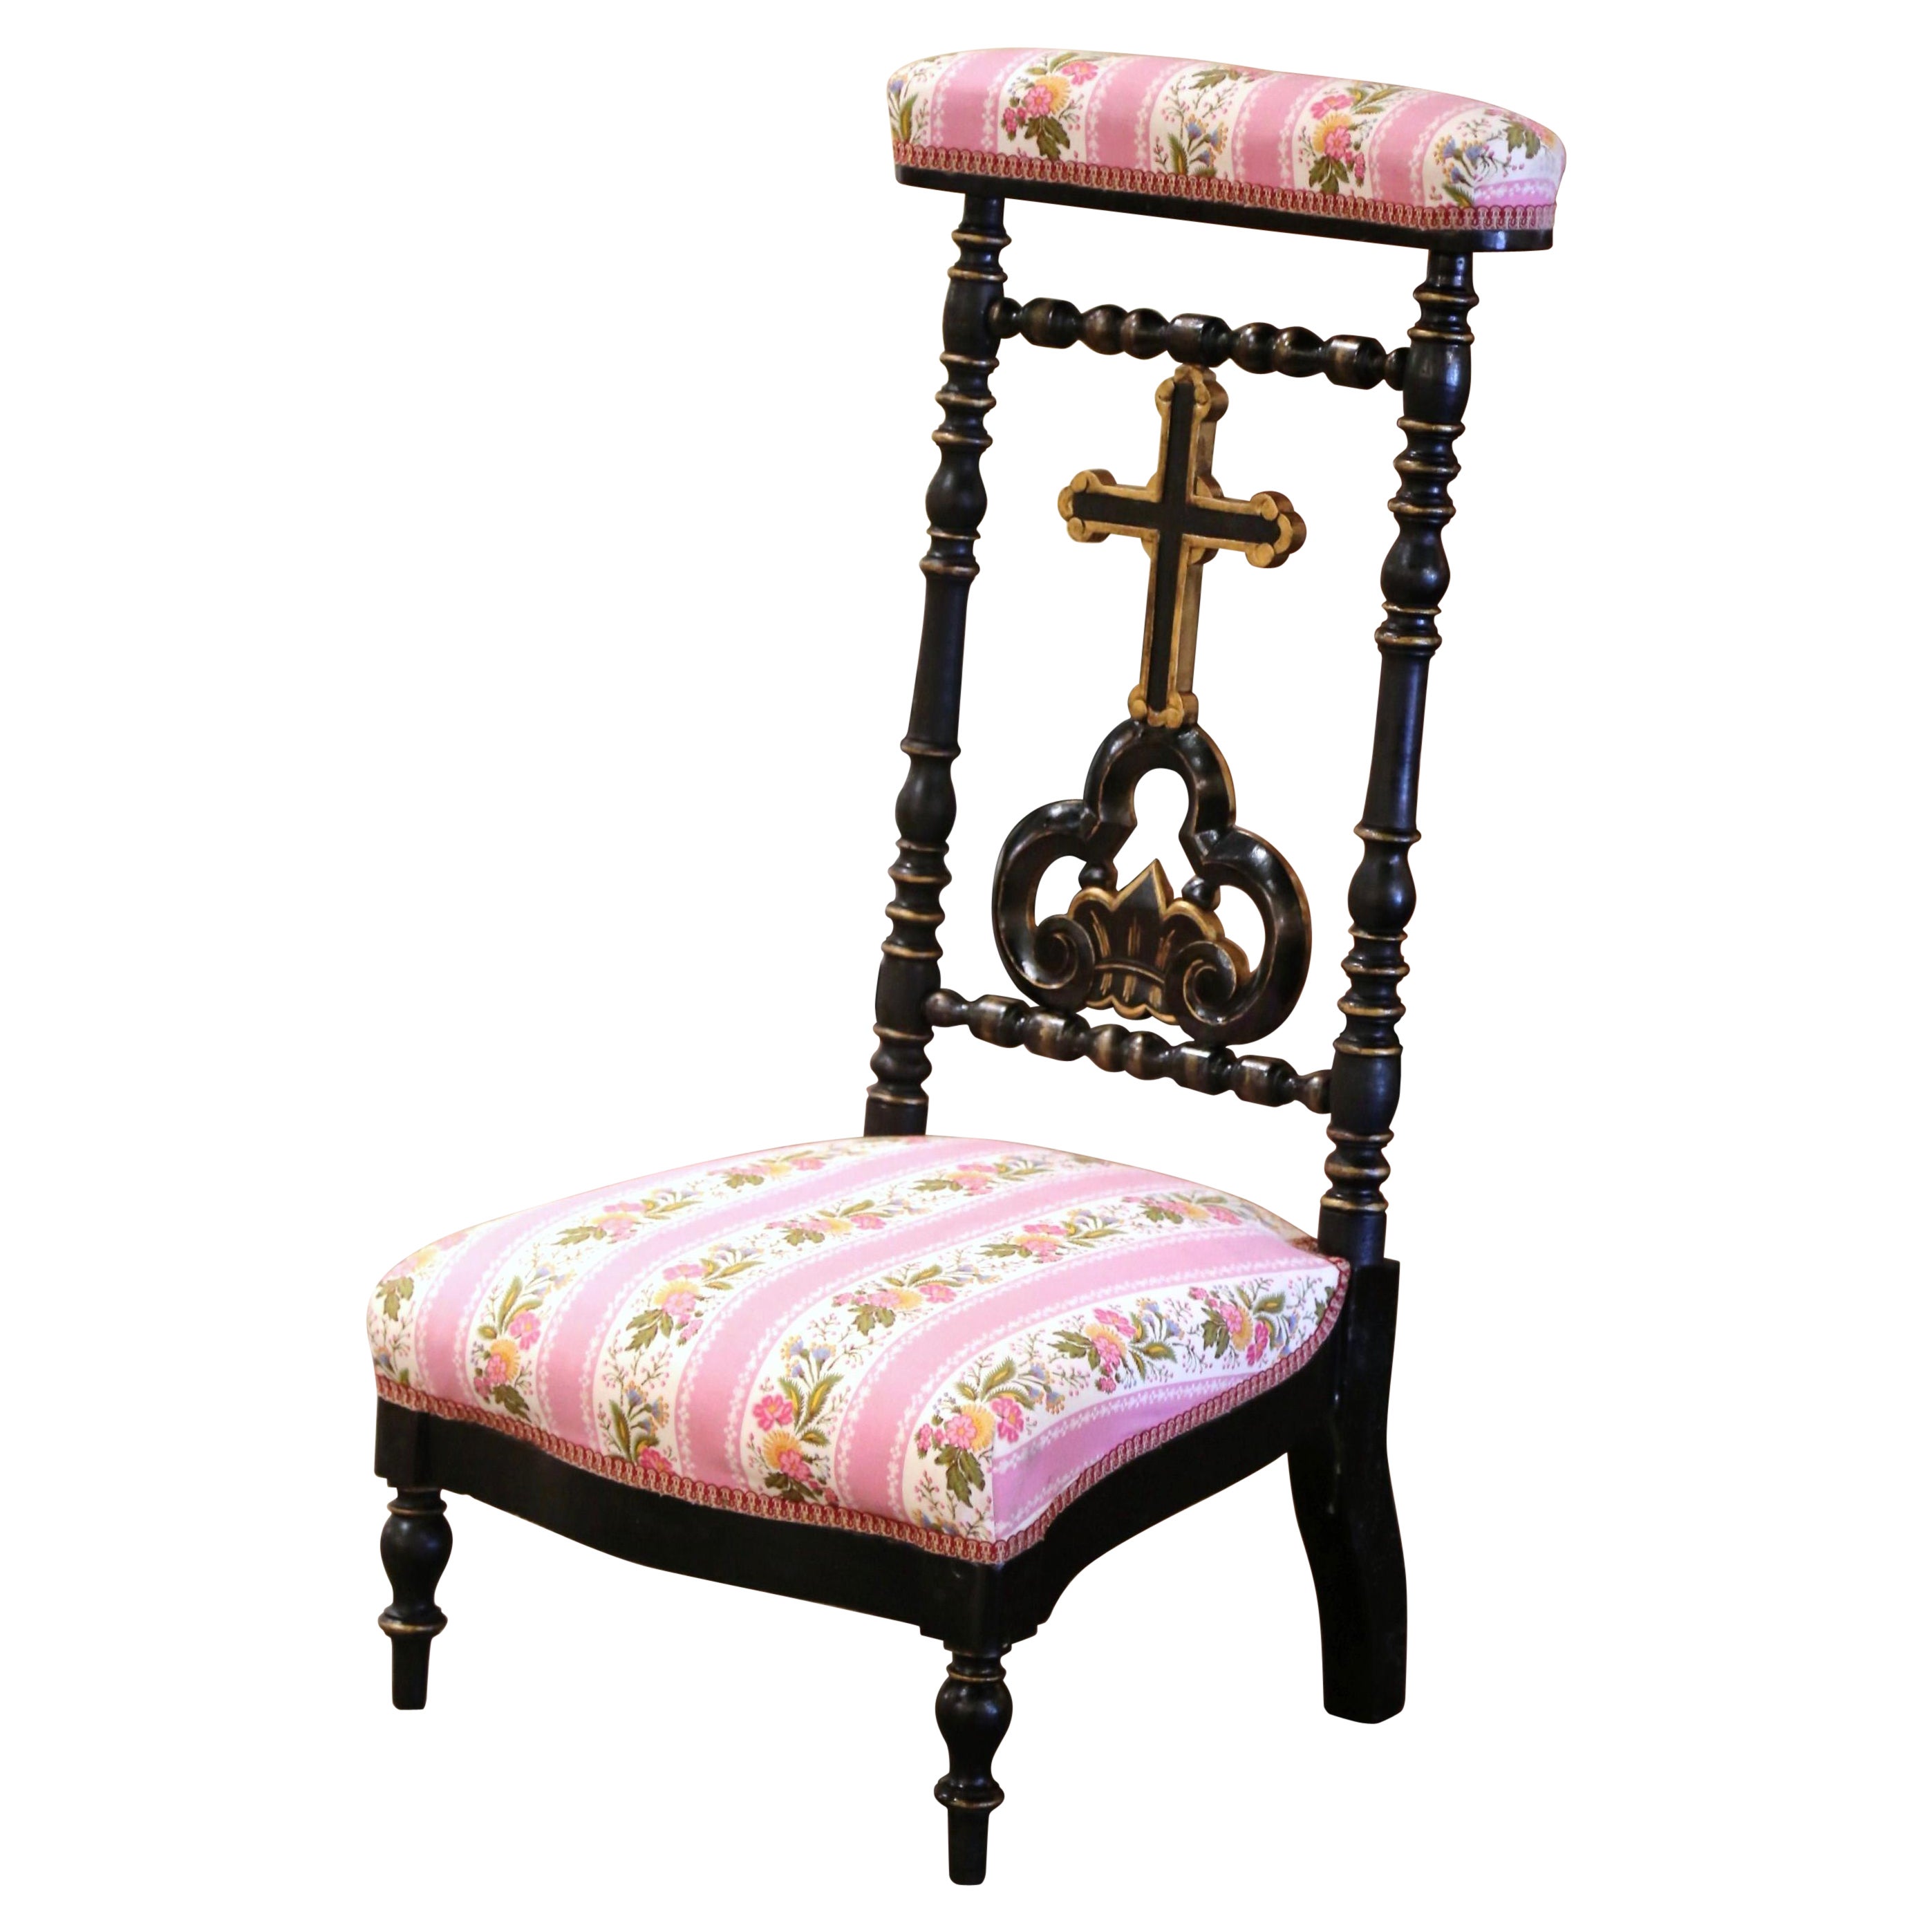 19th Century French Napoleon III Carved Blackened "Prie-Dieu" Prayer Chair  